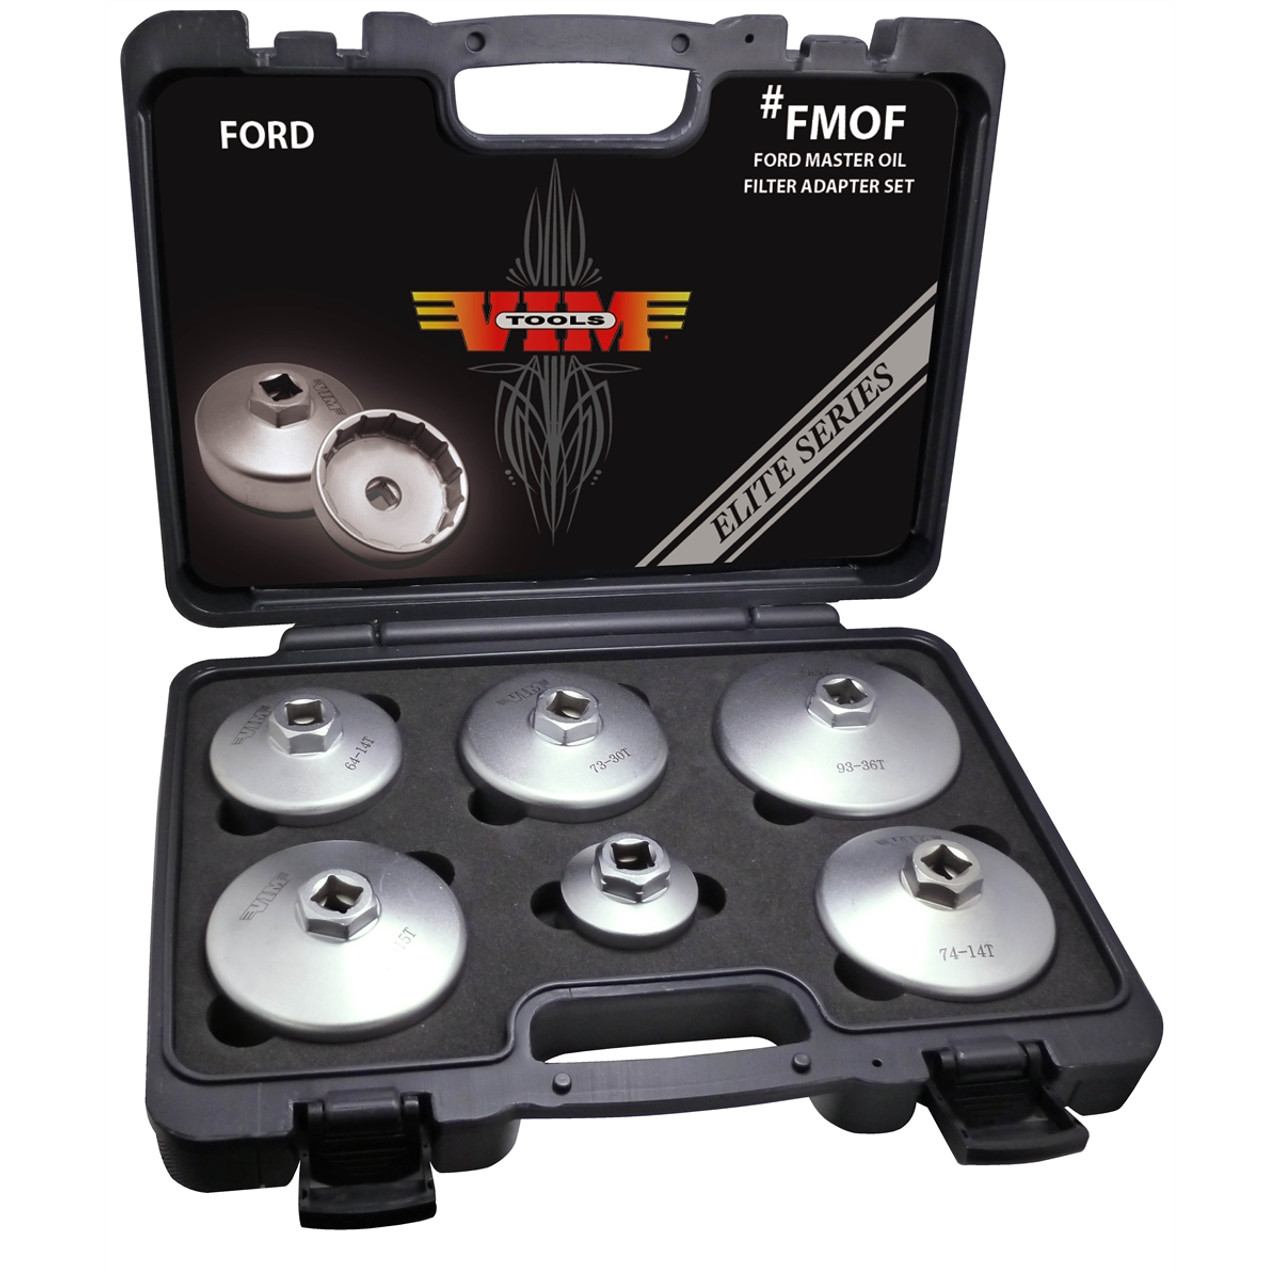 Durston Manufacturing Co FMOF FORD Master Oil Filter Adapter Set - 6 Piece